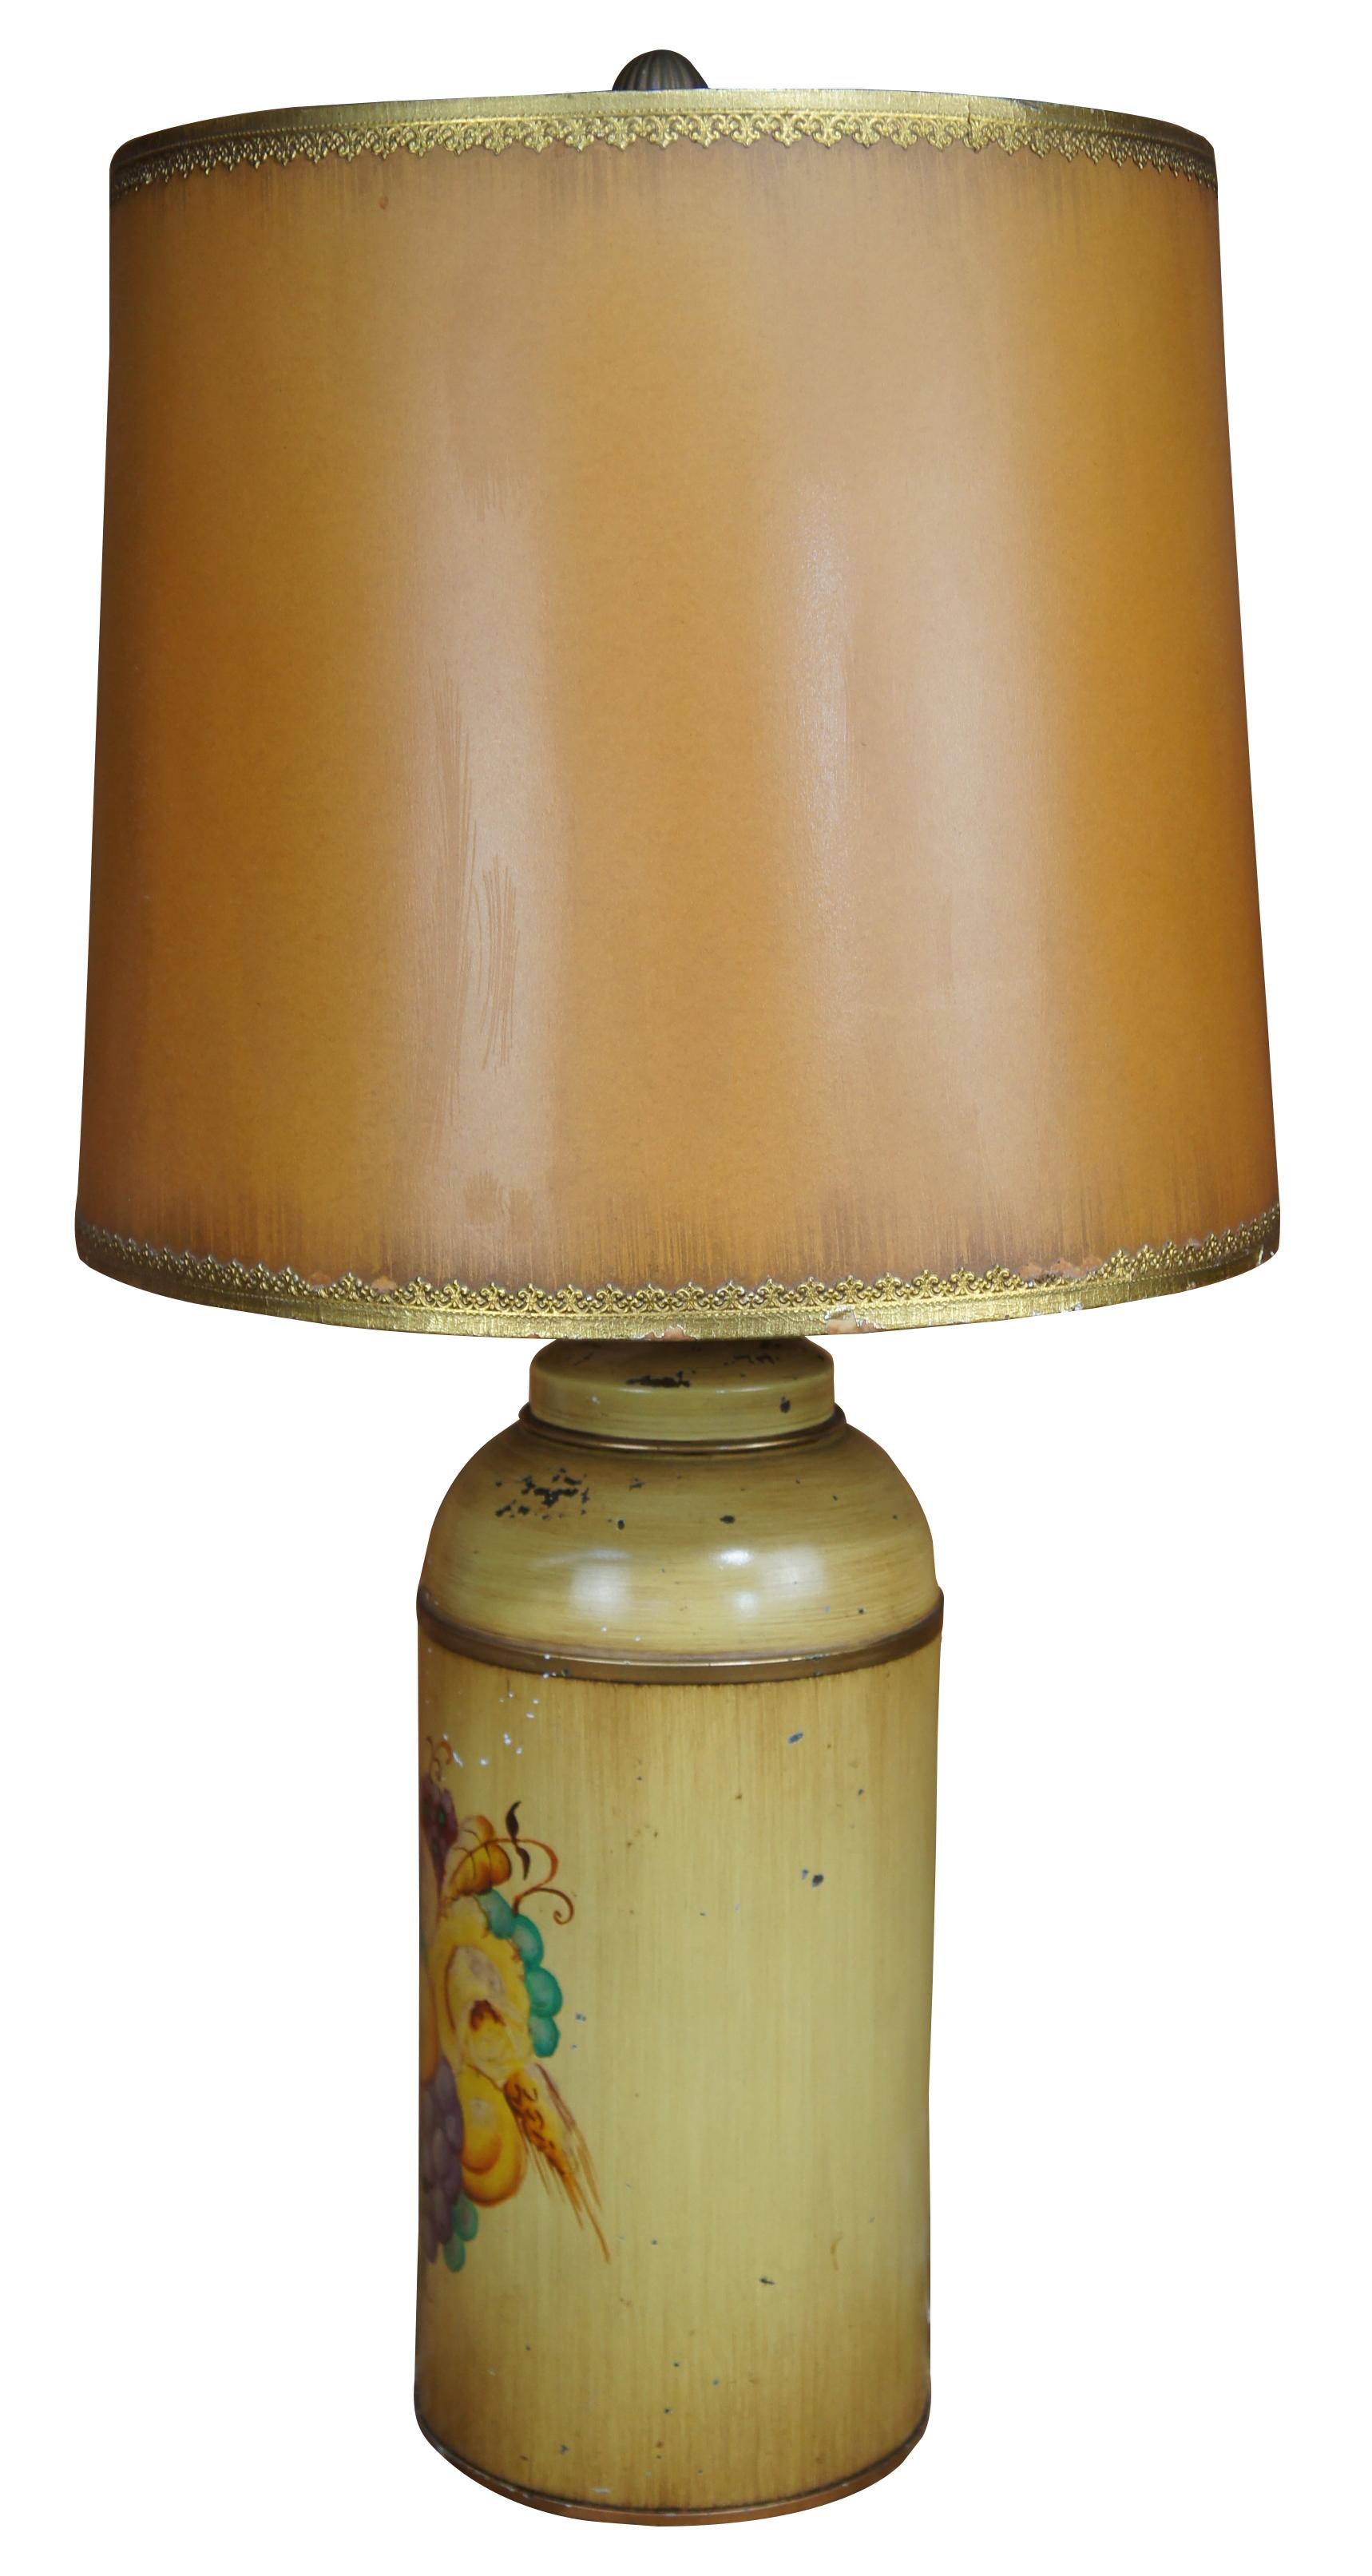 Mid 20th Century tole painted canister lamp. Features a yellow painted body with a still life of fruit along the front and barrel shade with ornate trim. 

Measures:6.25” x 17” / Shade - 14” x 12” / Total Height – 27.75” (Diameter x Height).